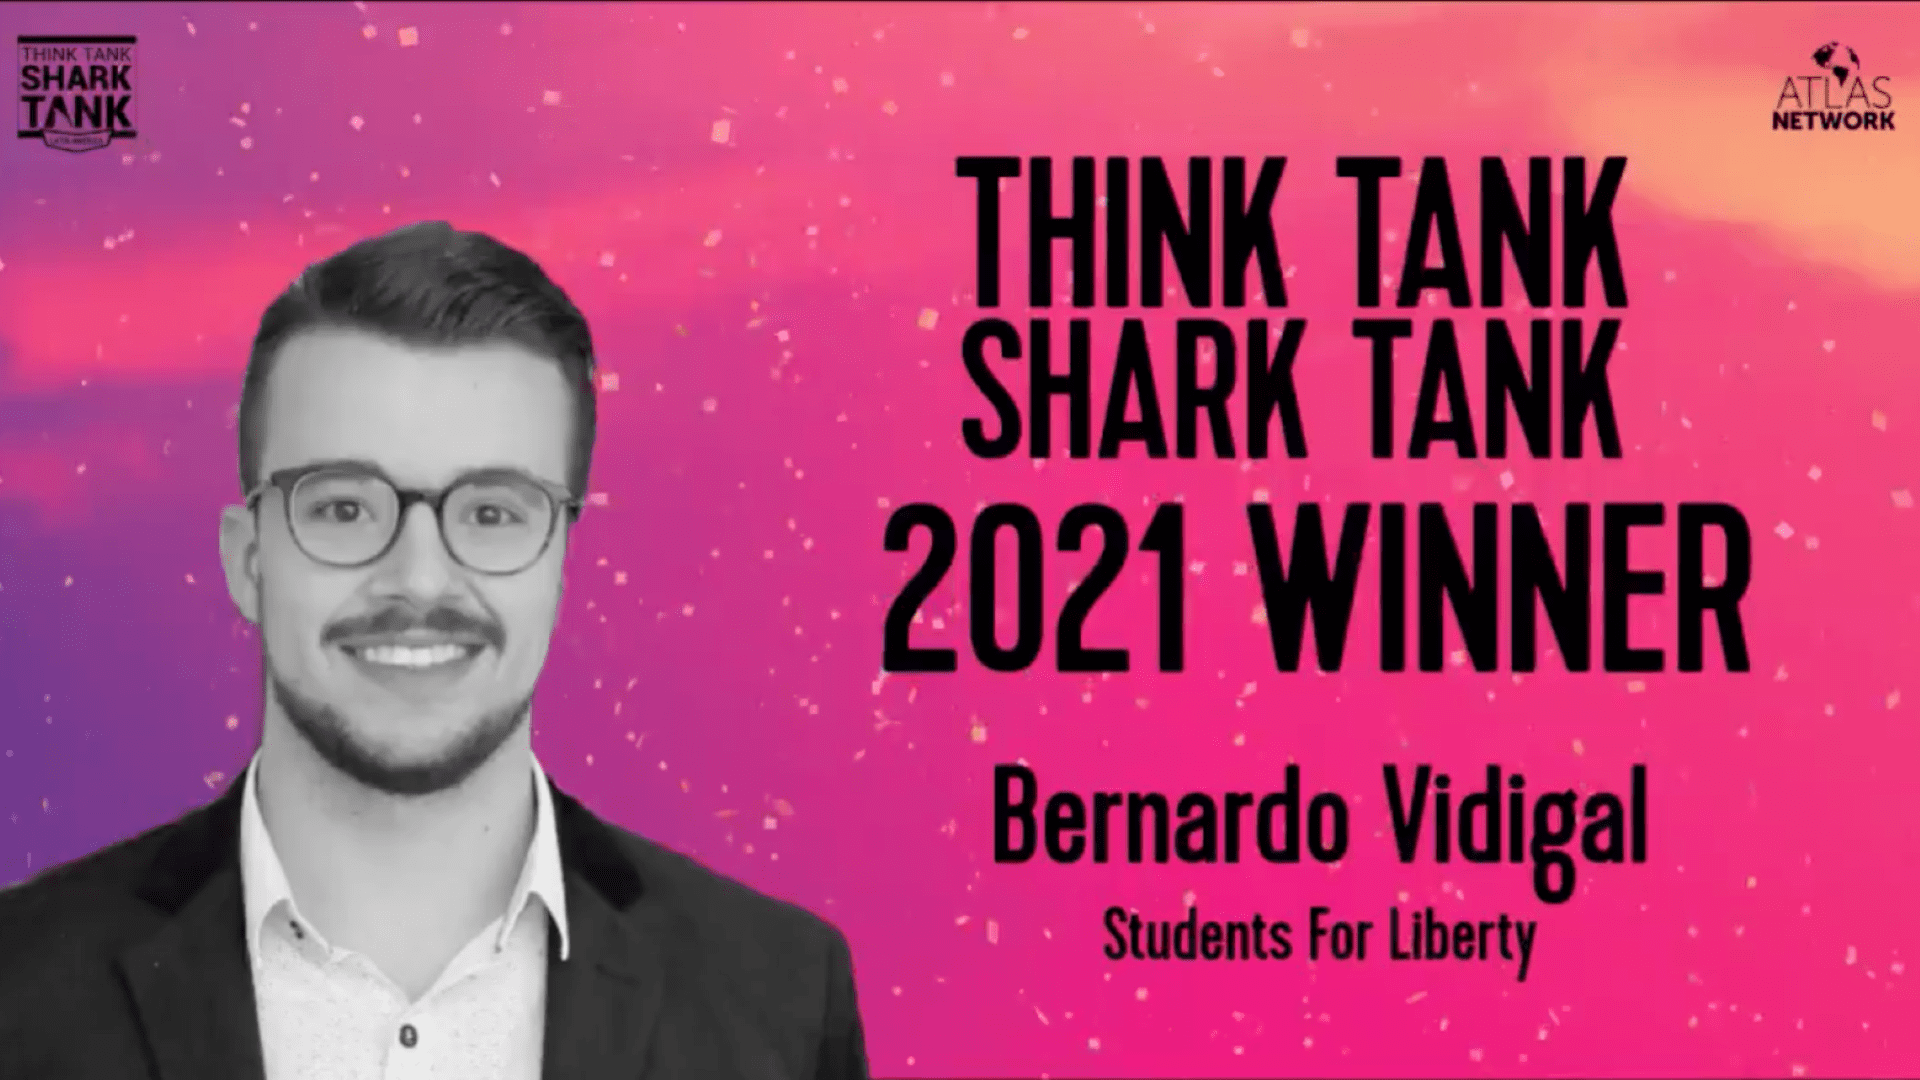 Students For Liberty Brazil won the 2021 Latin America Think Tank Shark Tank competition for their pitch on education in of Brazil’s favelas.